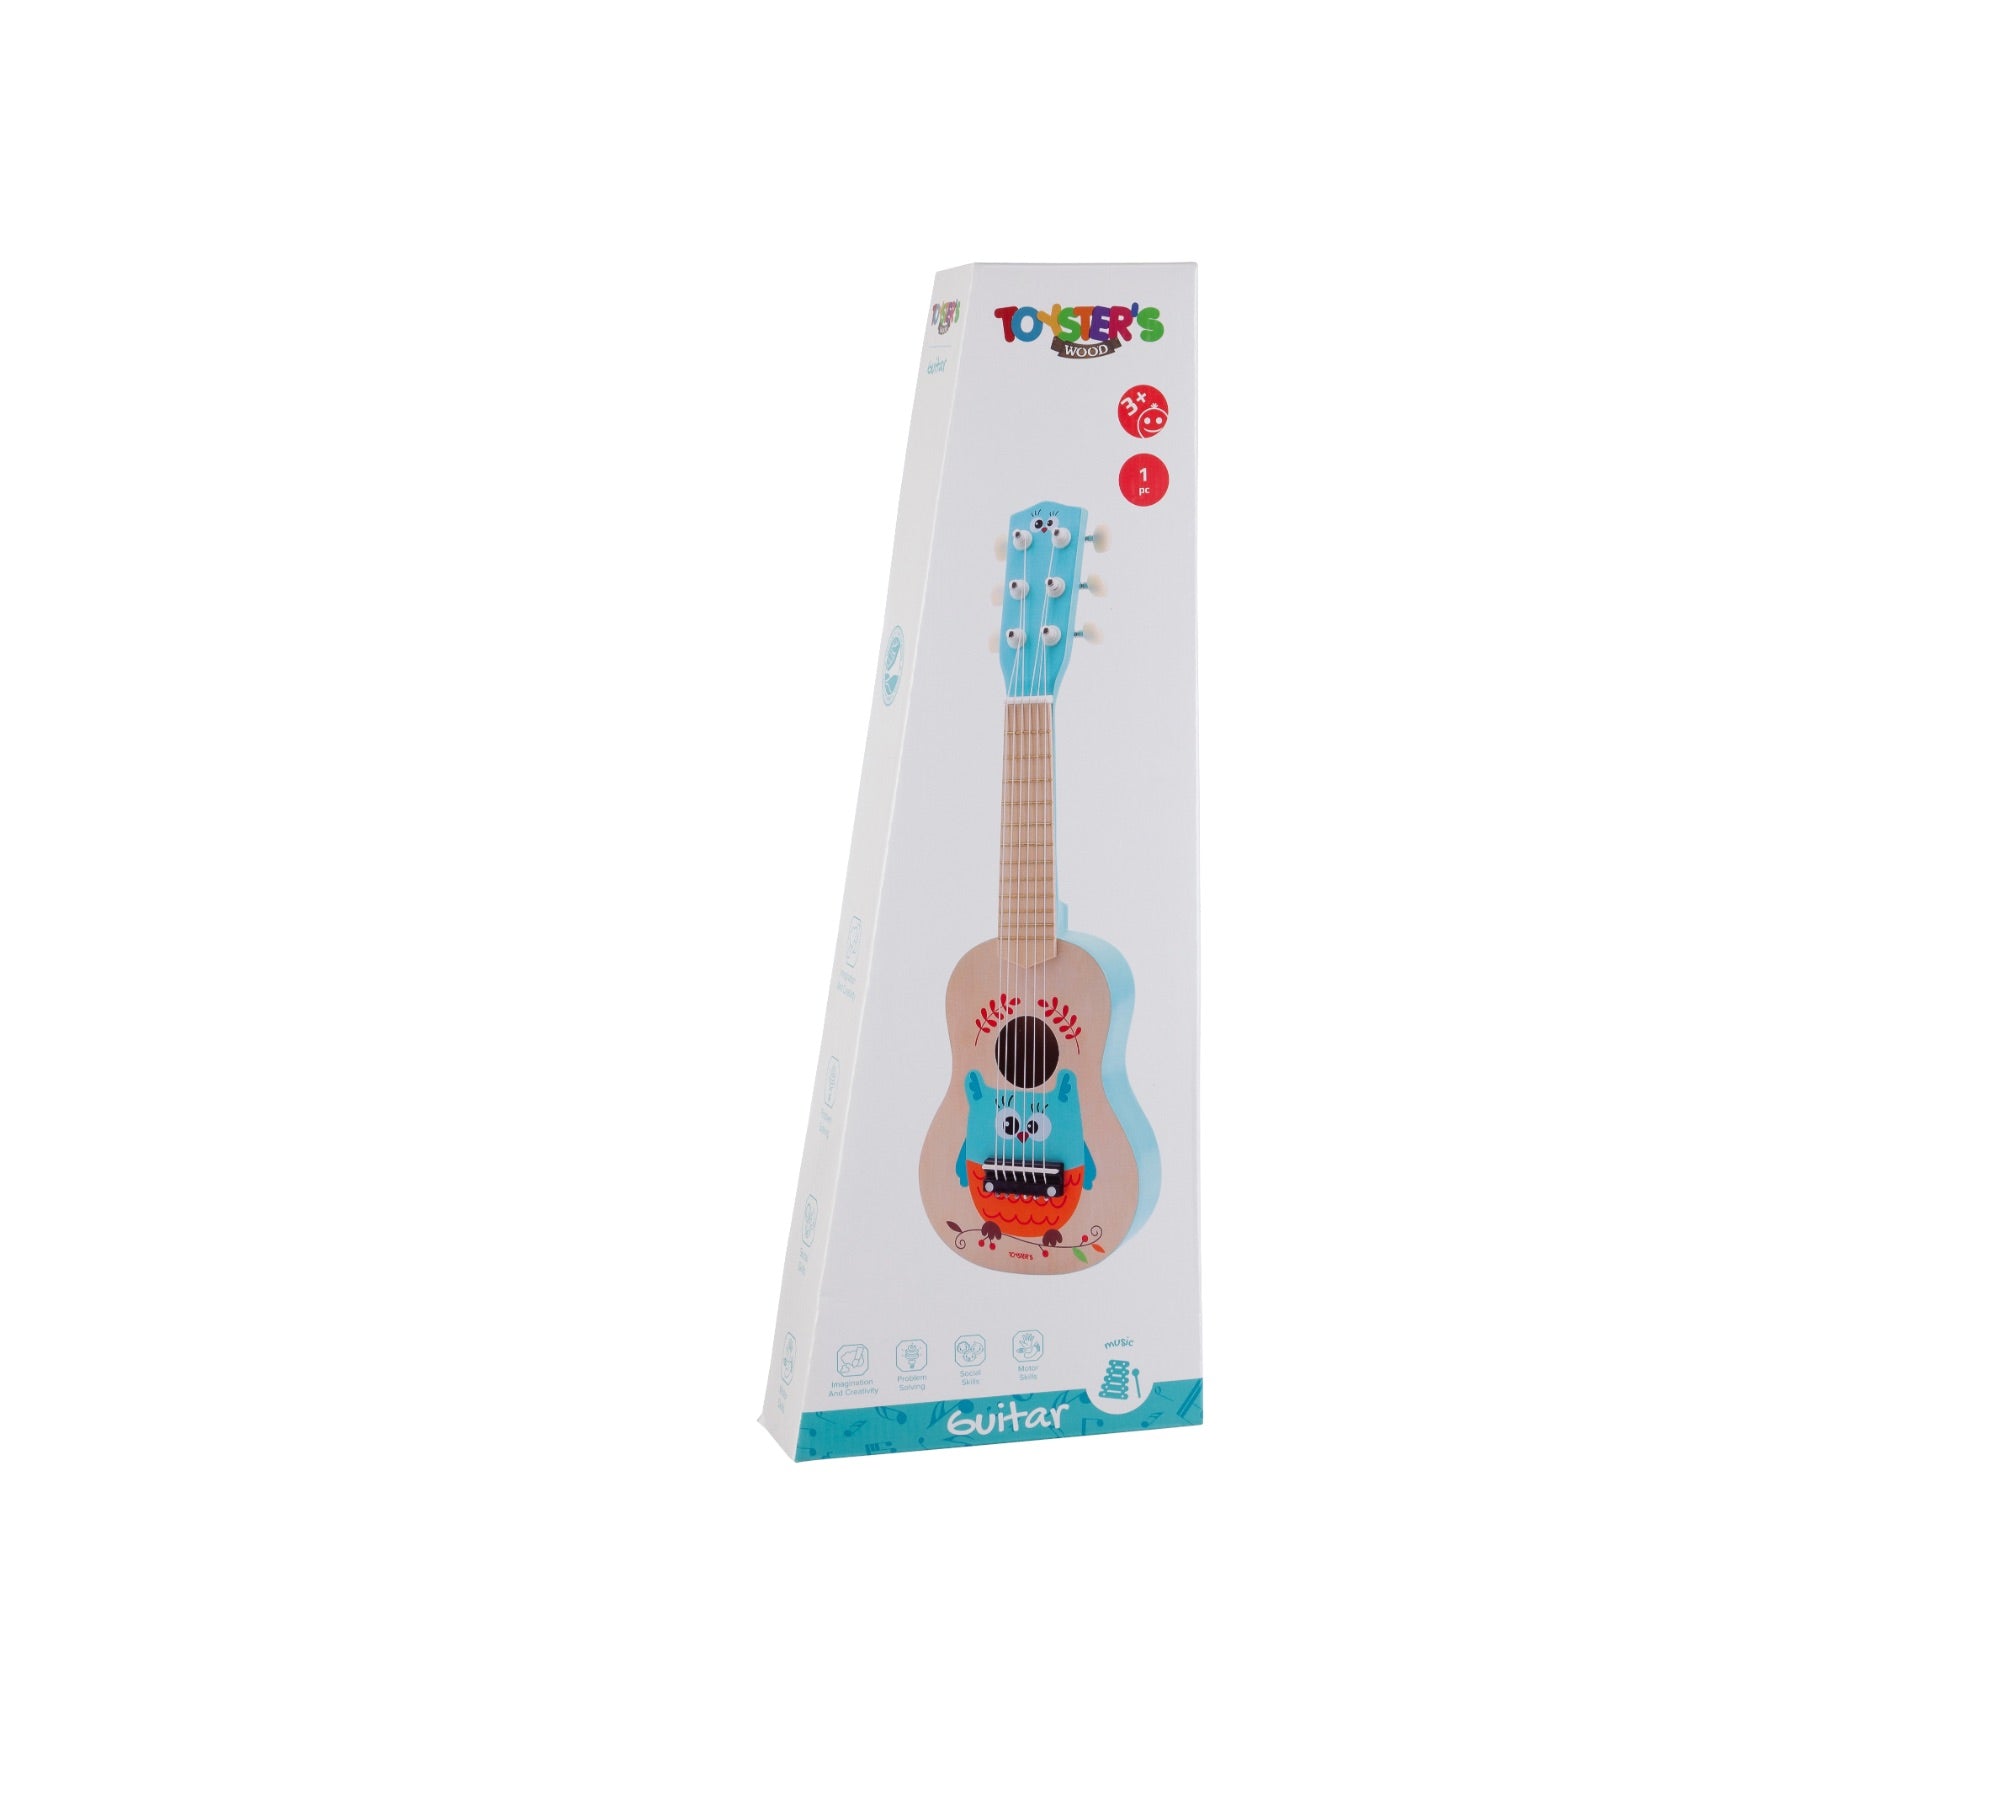 Toysters Wooden Toy Guitar Ukulele with Real Tuning